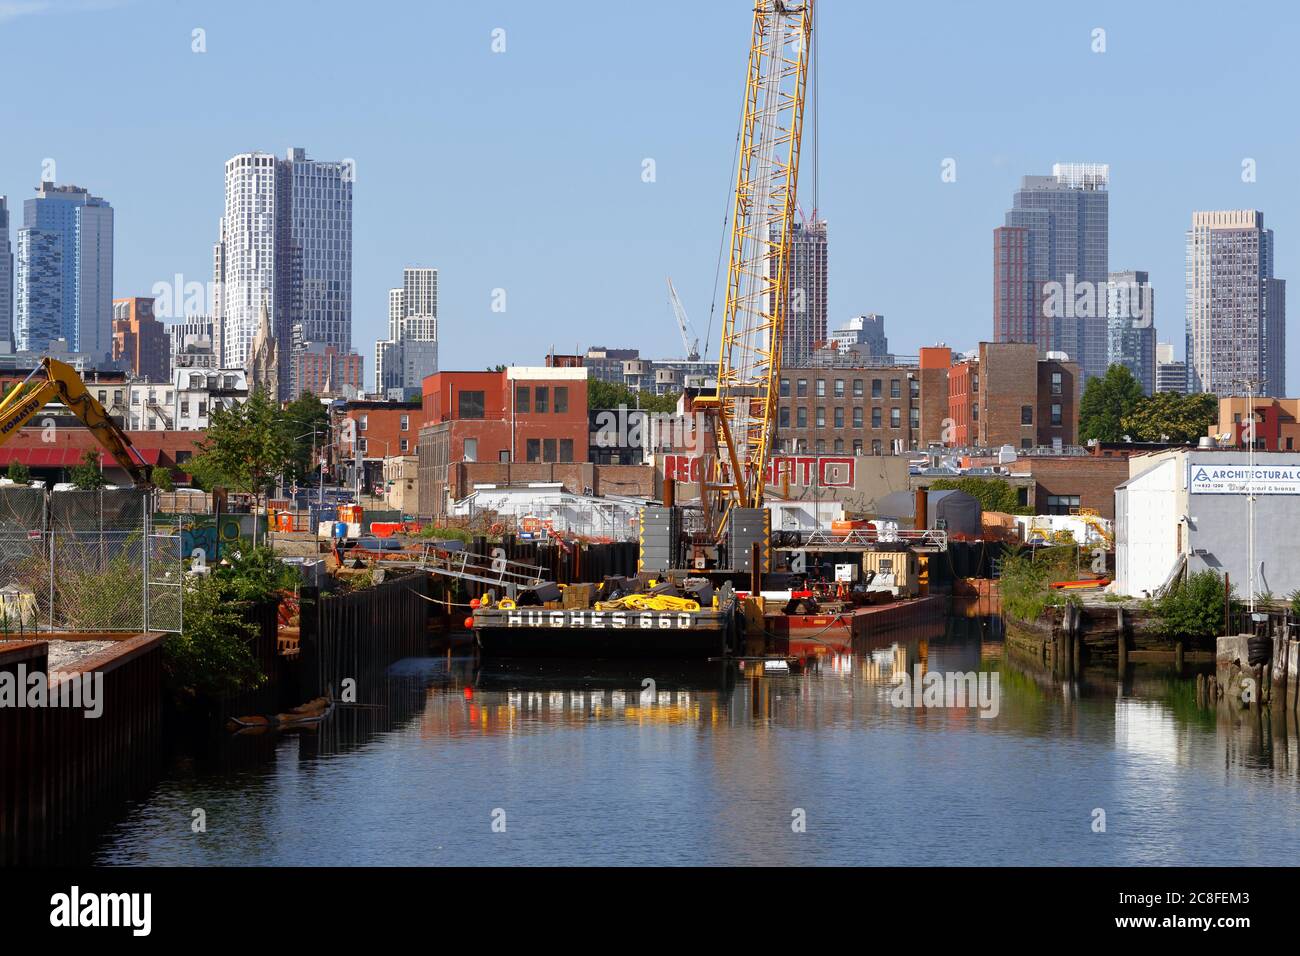 Staging Area and Barges of the EPA Gowanus Canal Superfund Site at the old Citizens Gas Light former 12th ward Manufactured Gas Plant, July 2020. Stockfoto